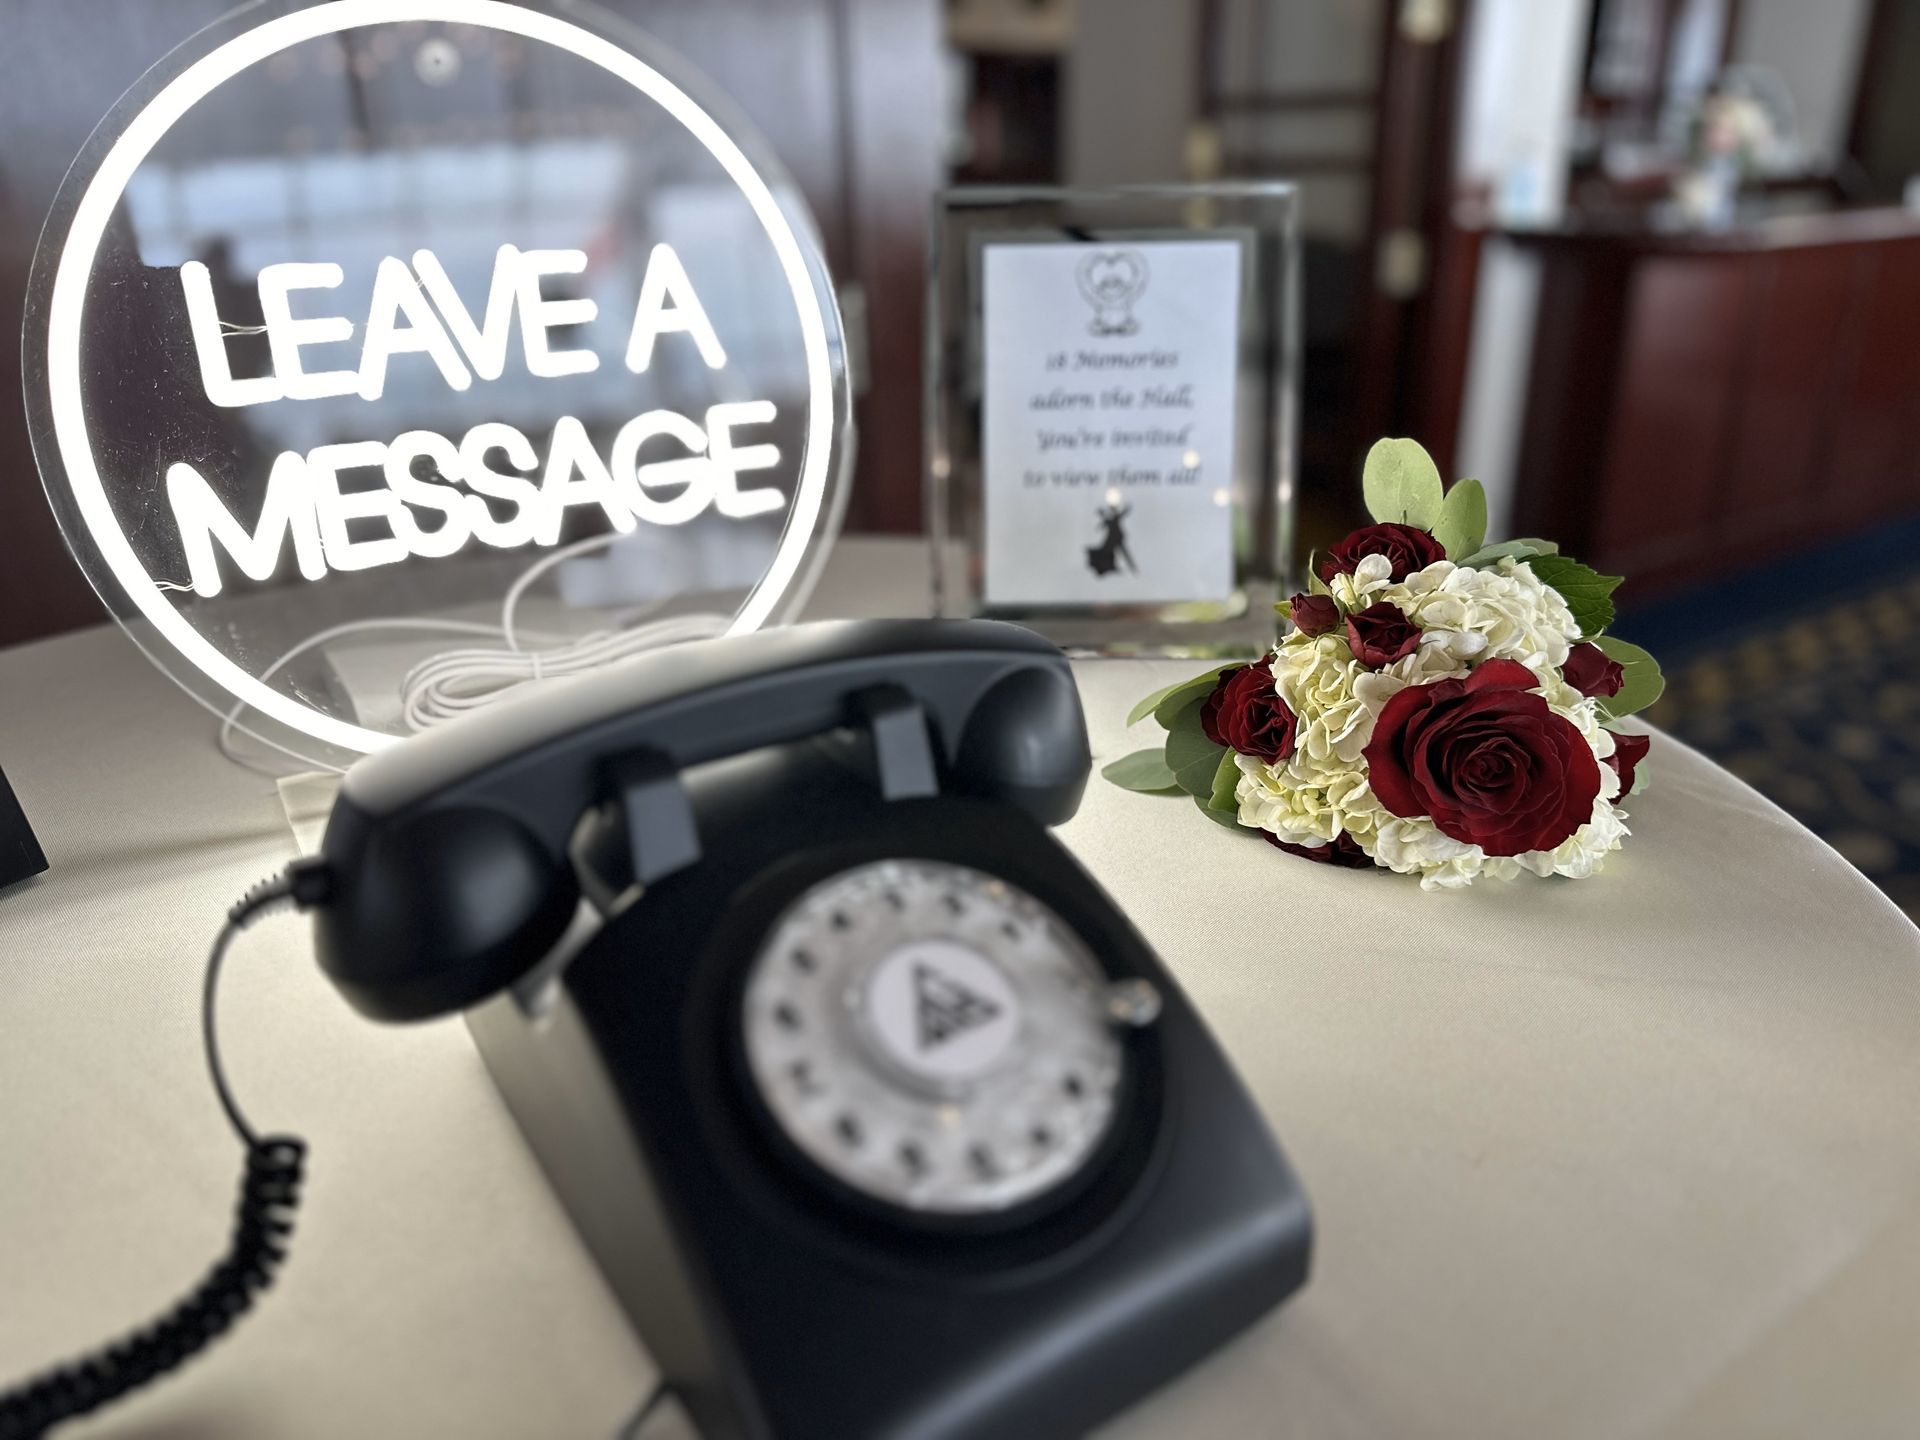 a black telephone is sitting on a table next to a sign that says leave a message .